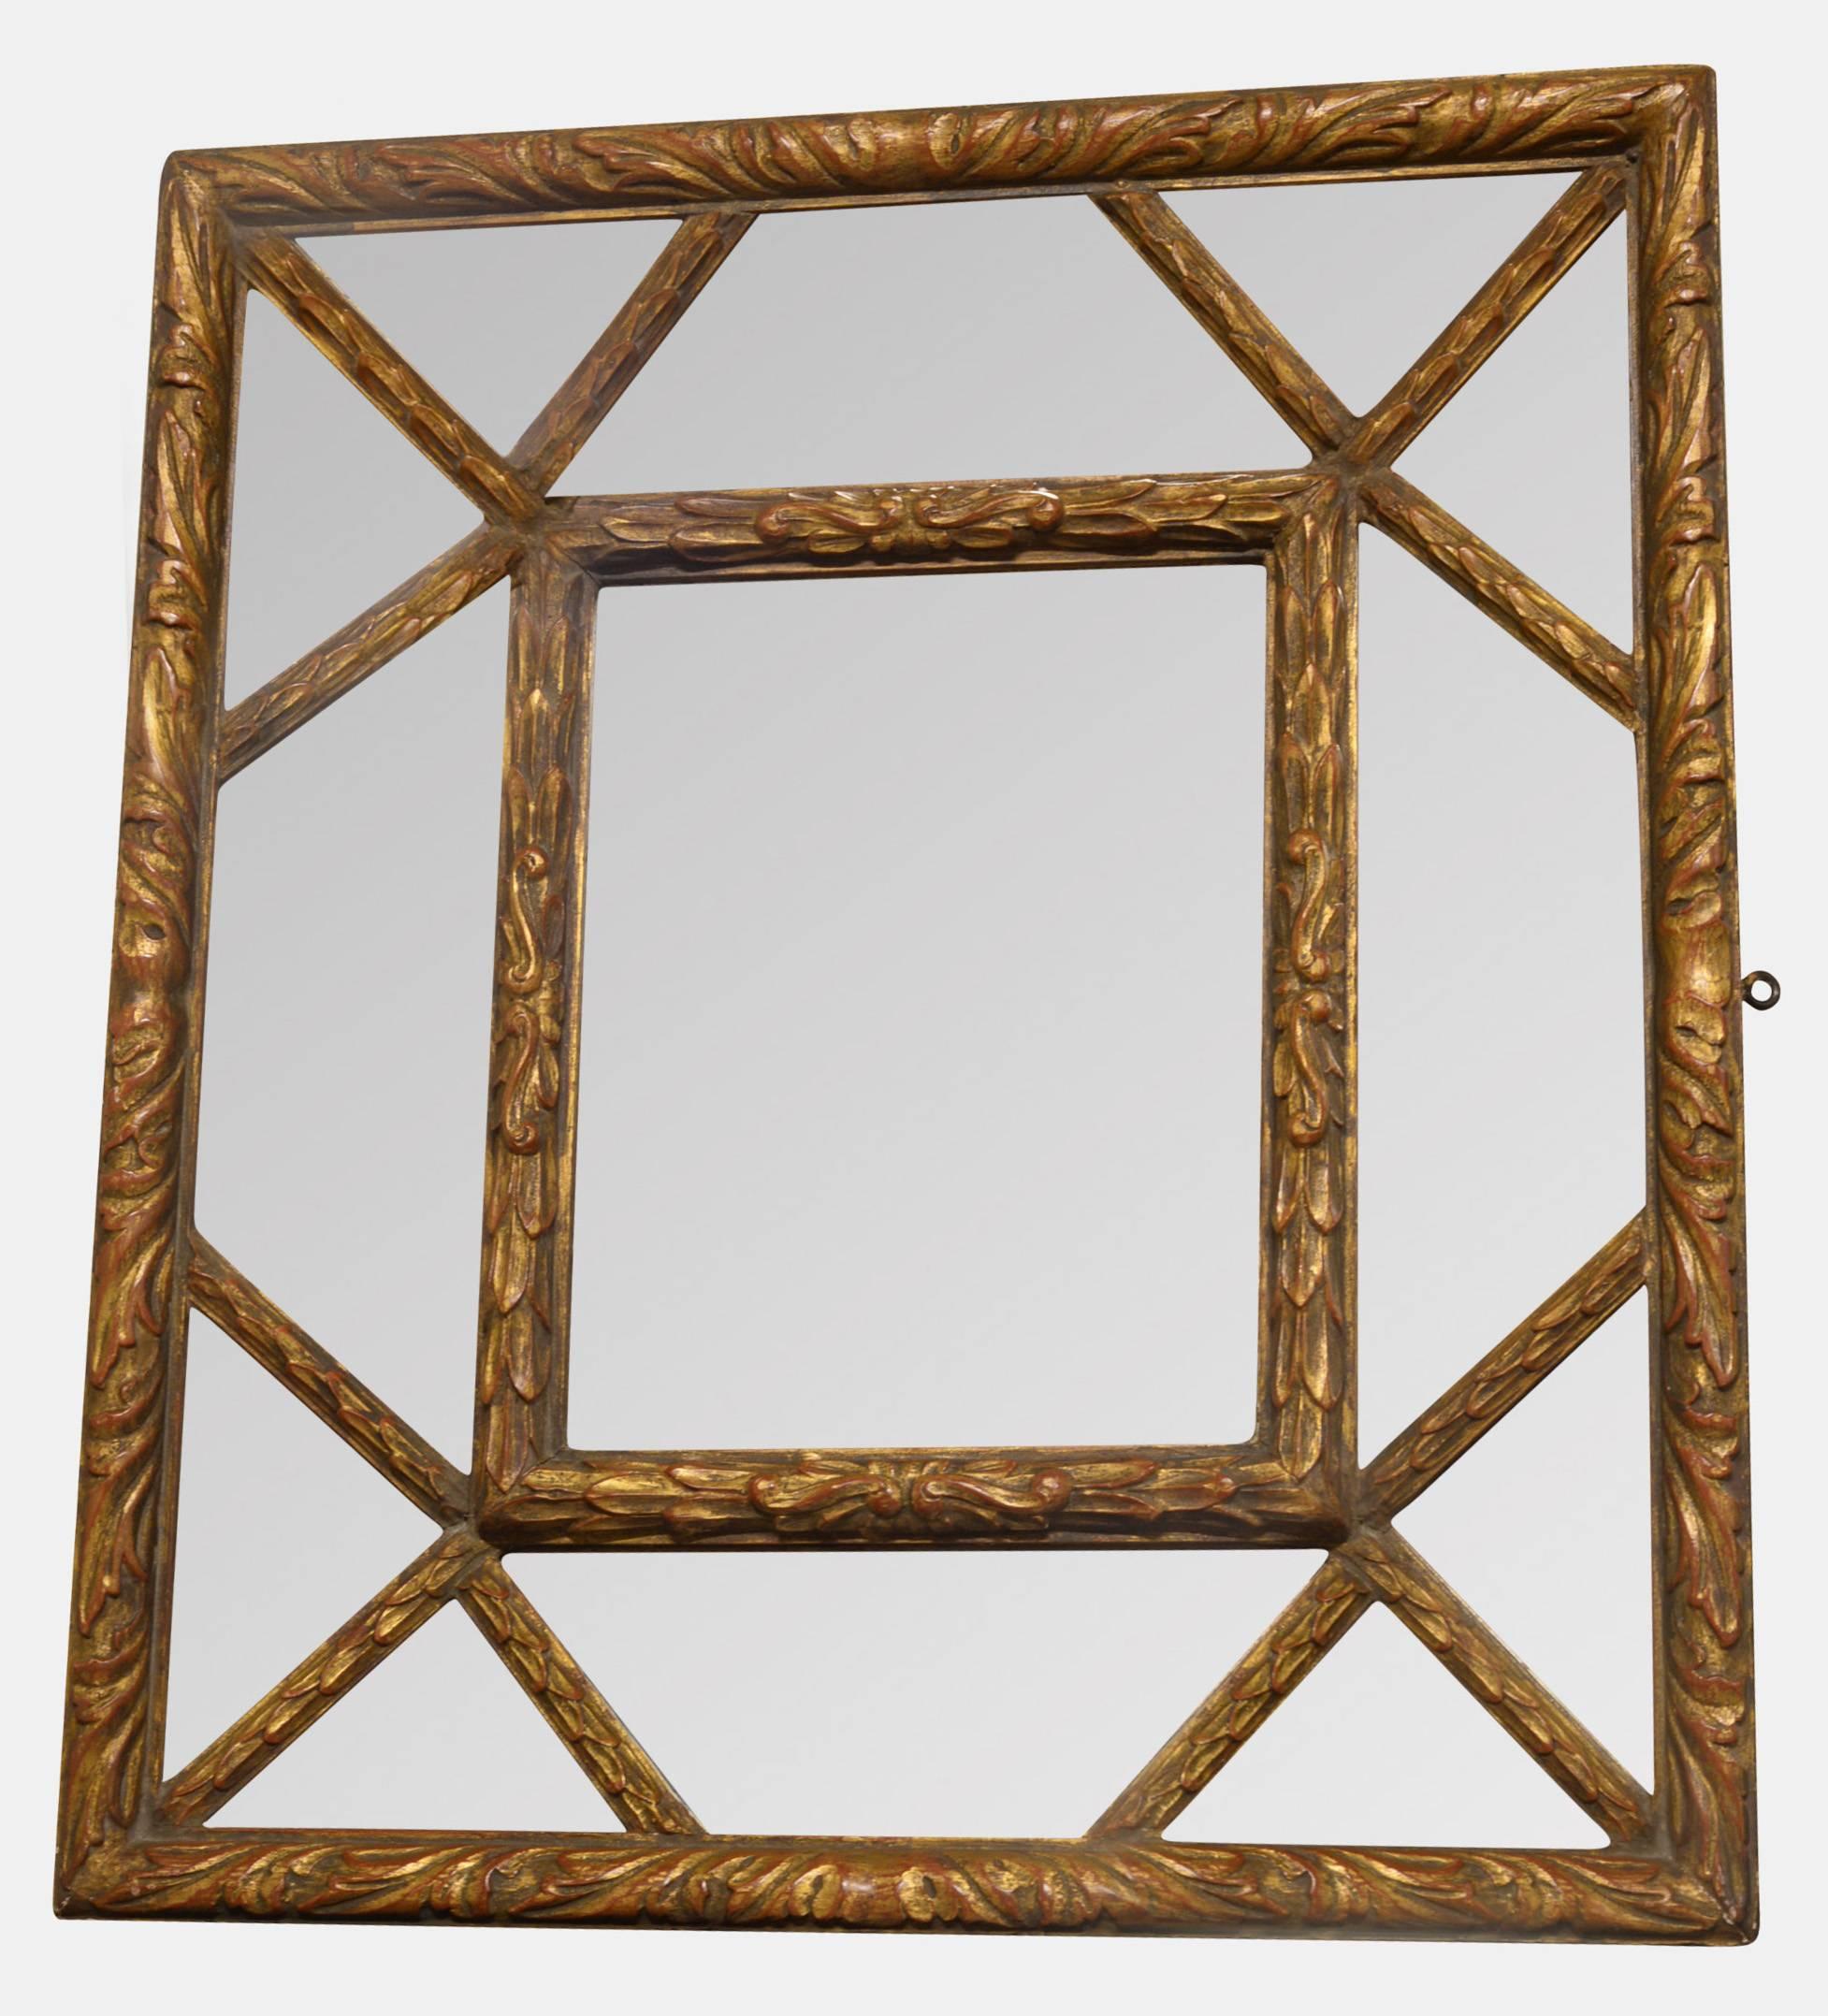 A French carved wooden framed mirror set in carved gilded wooden box frame,

circa 1900.